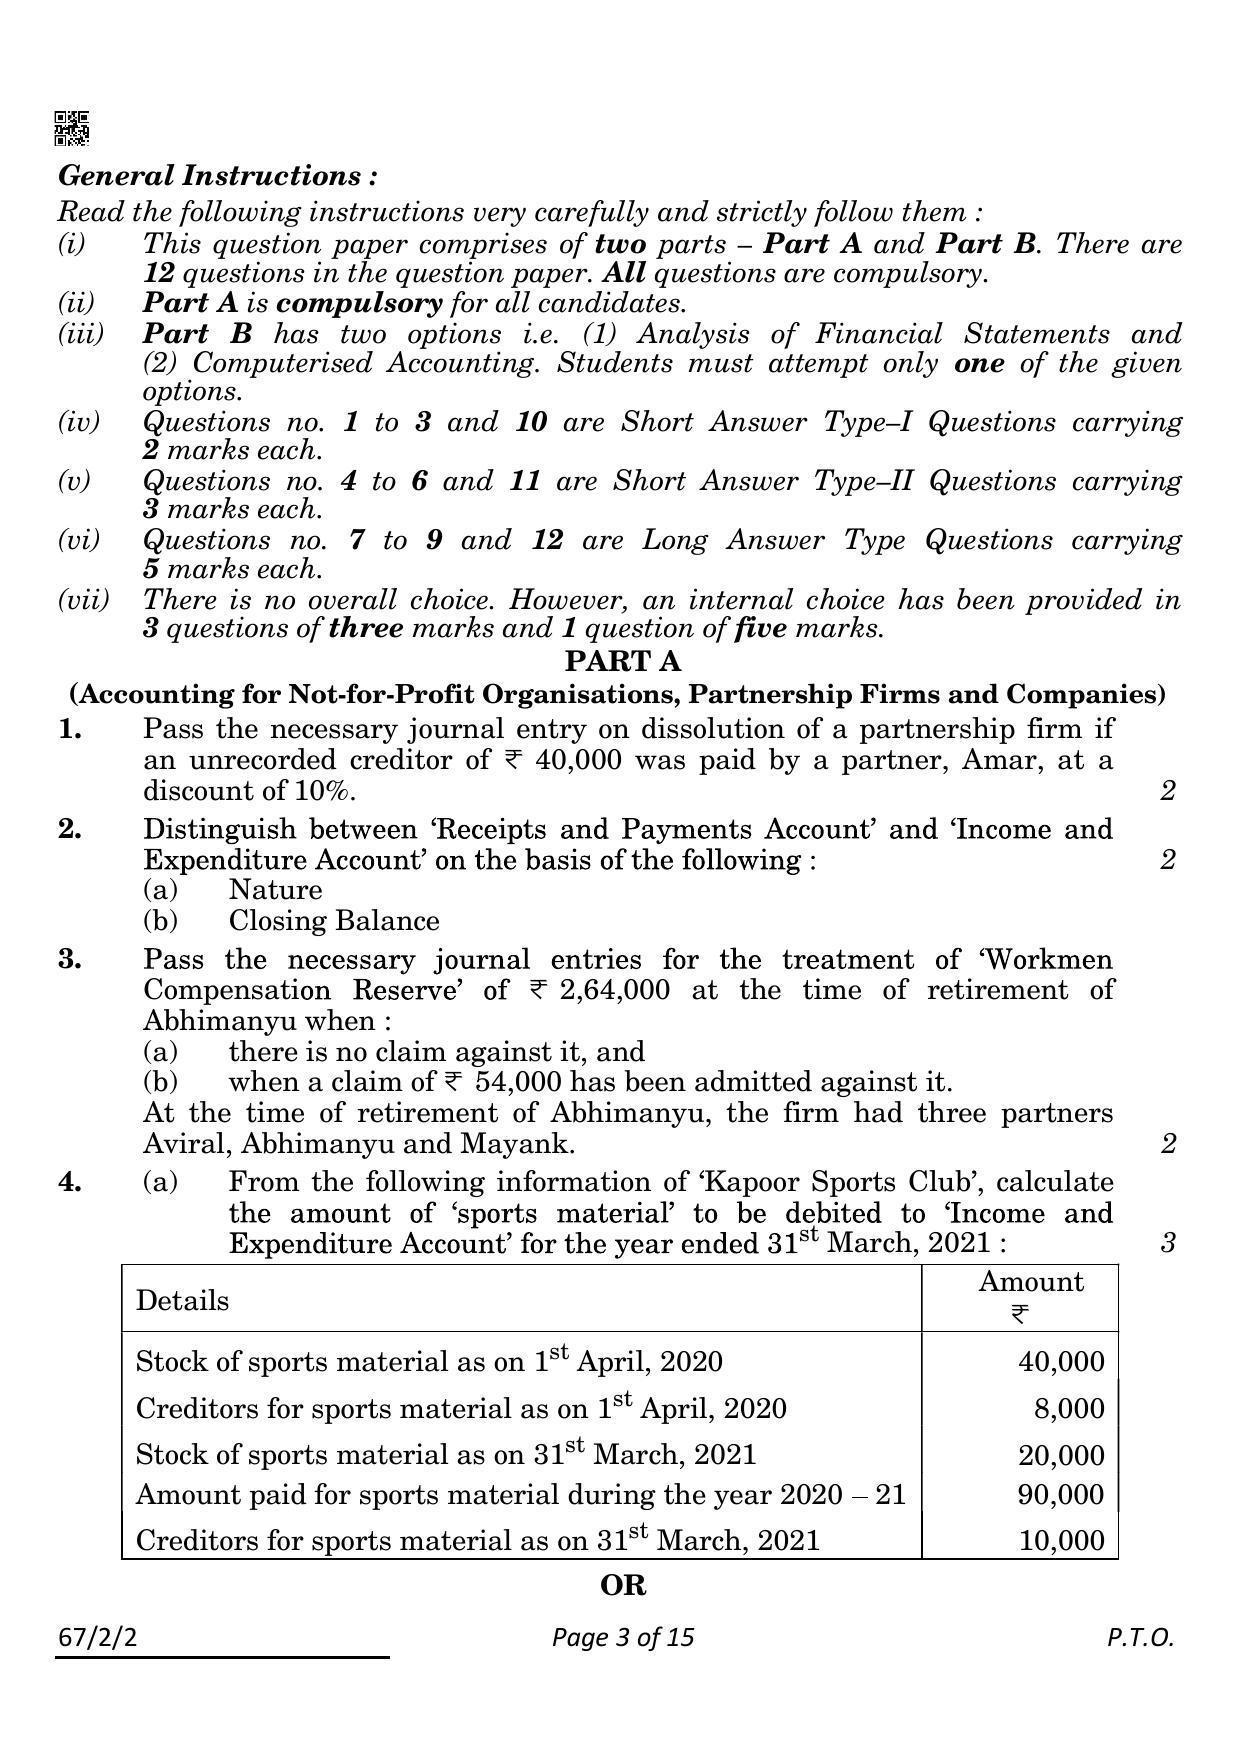 CBSE Class 12 67-2-2 Accountancy 2022 Question Paper - Page 3